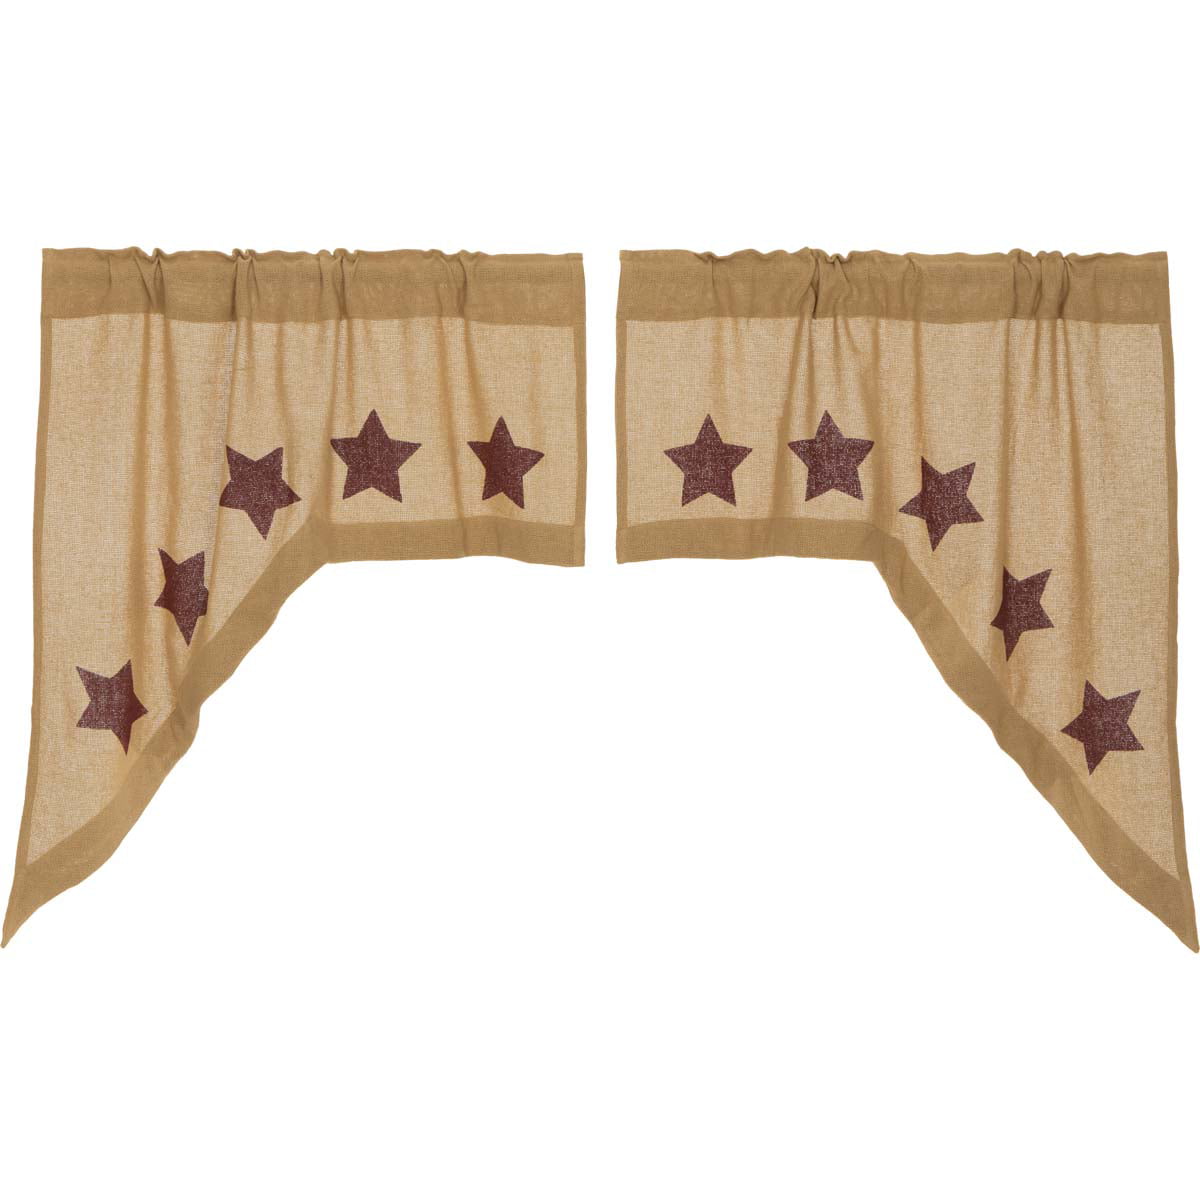 VHC Brands Burlap with Burgundy Stencil Stars Tier Set of 2 L36xW36 Country Curtains Tan